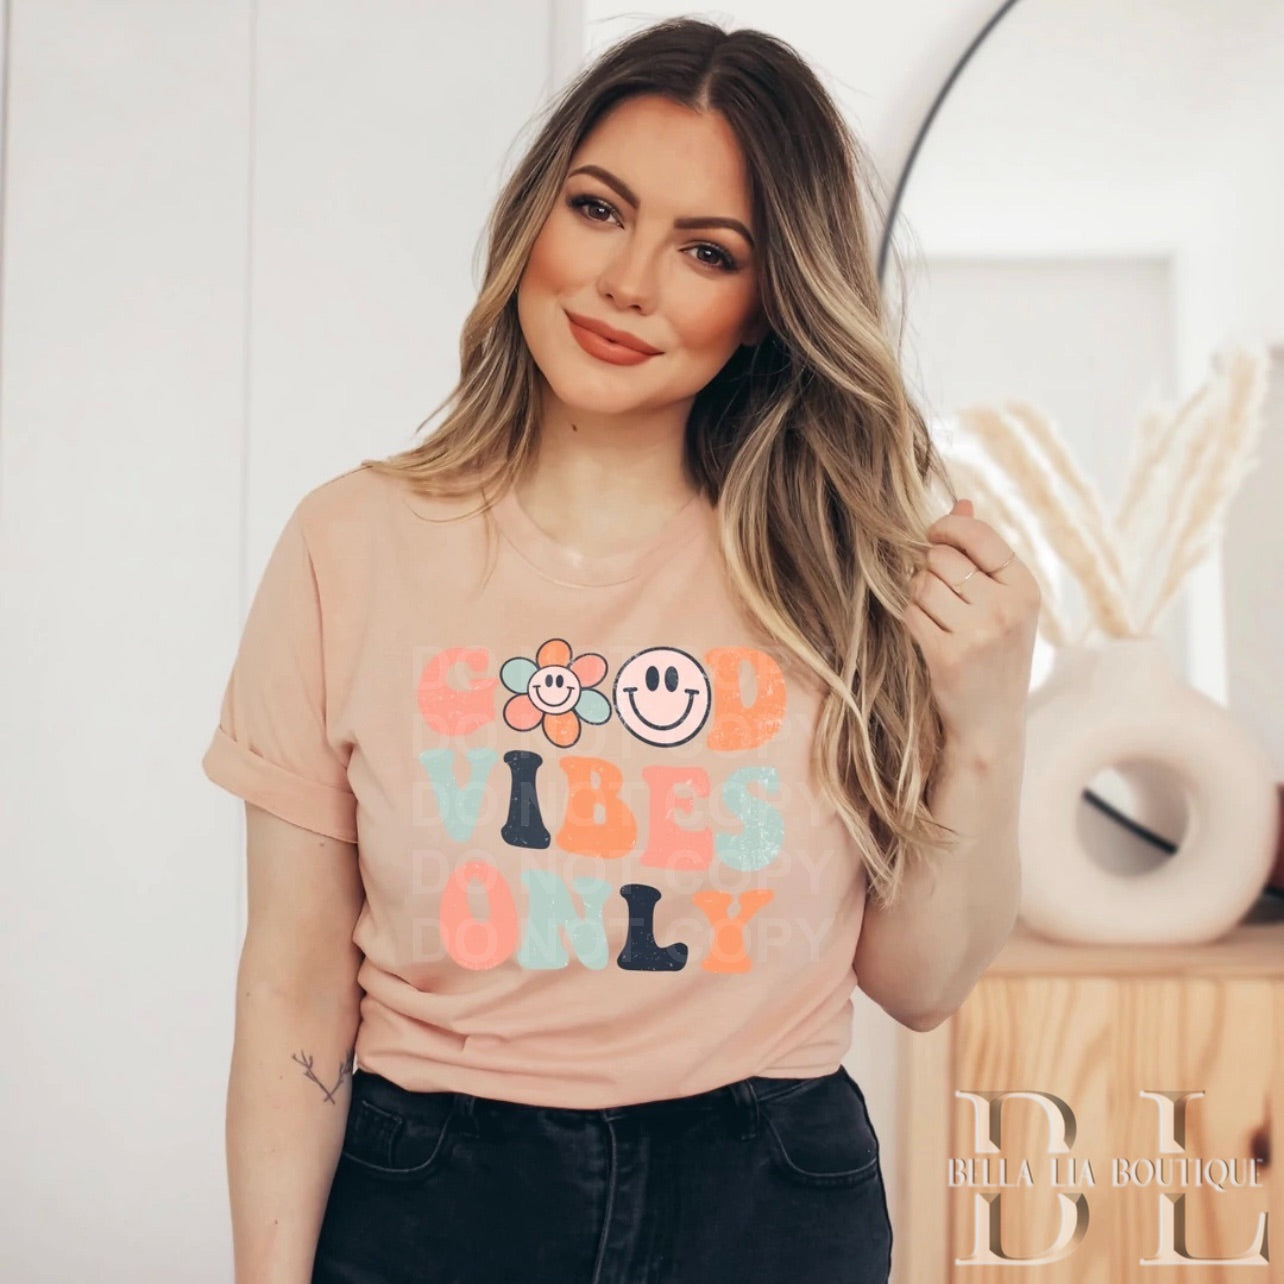 Good Vibes Only Graphic Tee or Sweatshirt - Bella Lia Boutique